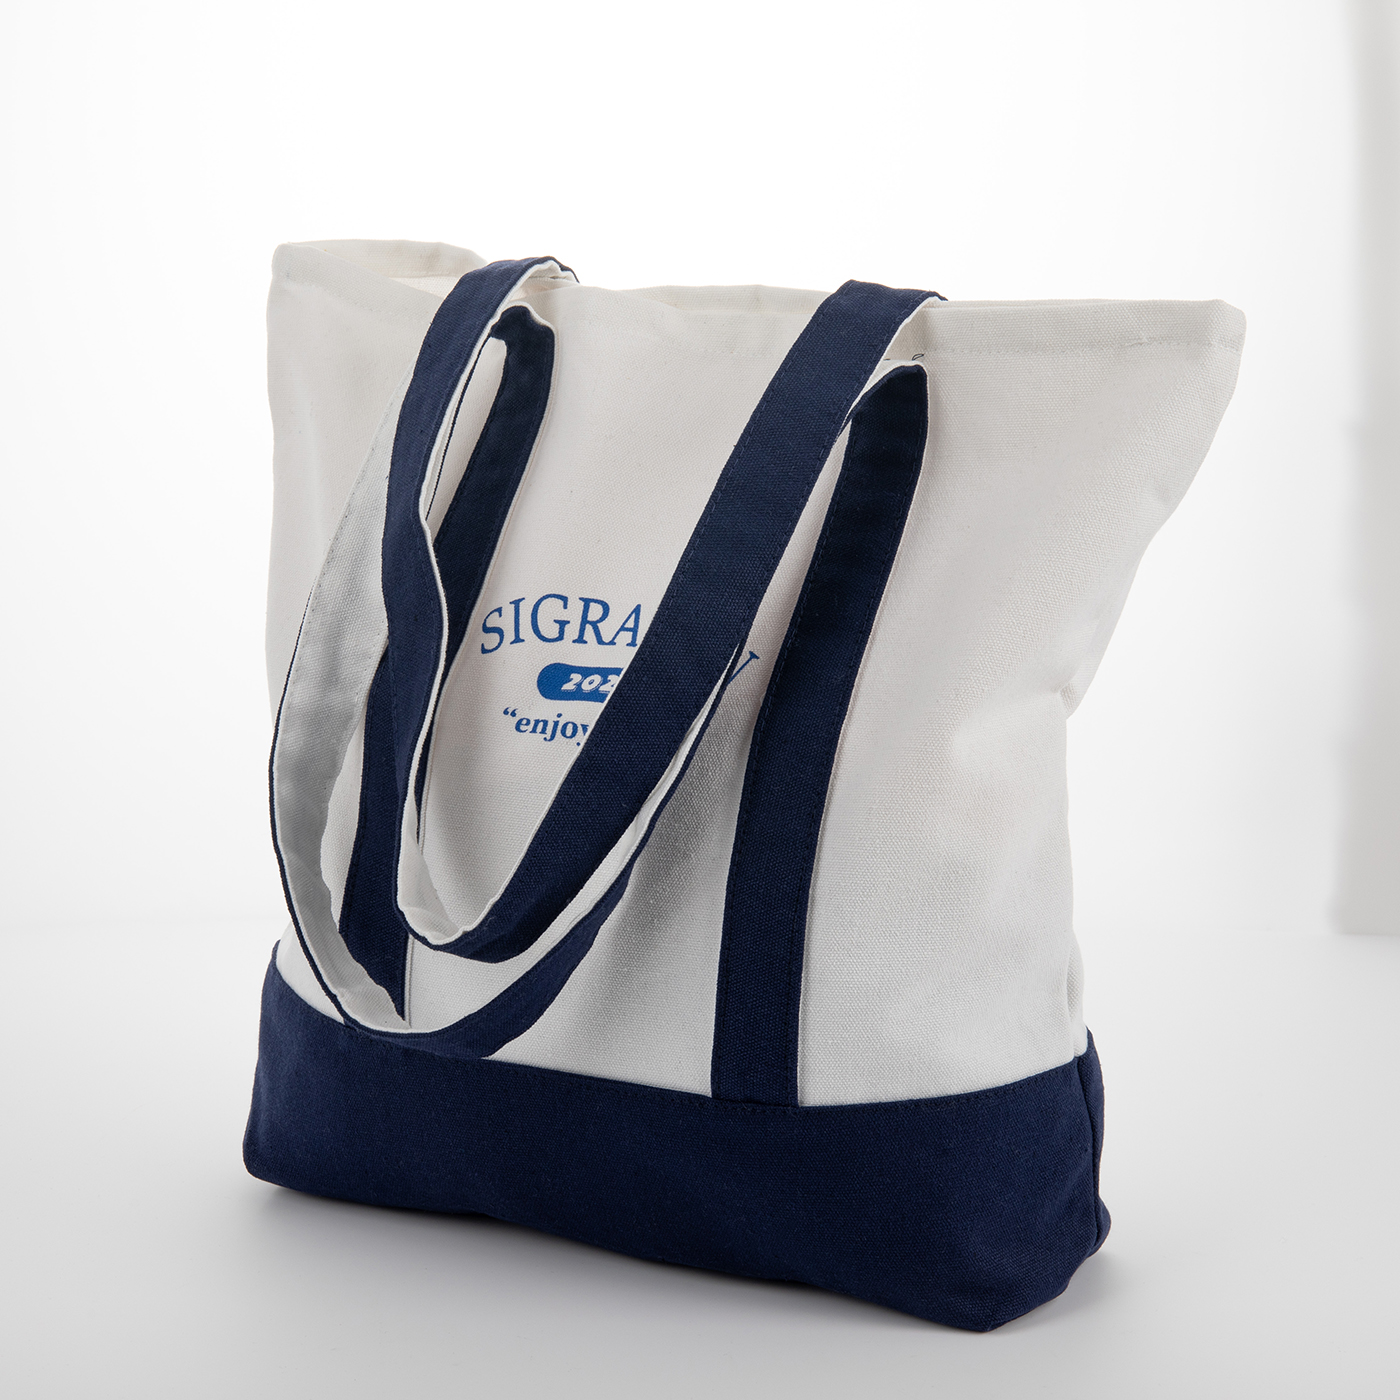 12 oz. Cotton Canvas Boat Grocery Shopping Bag2